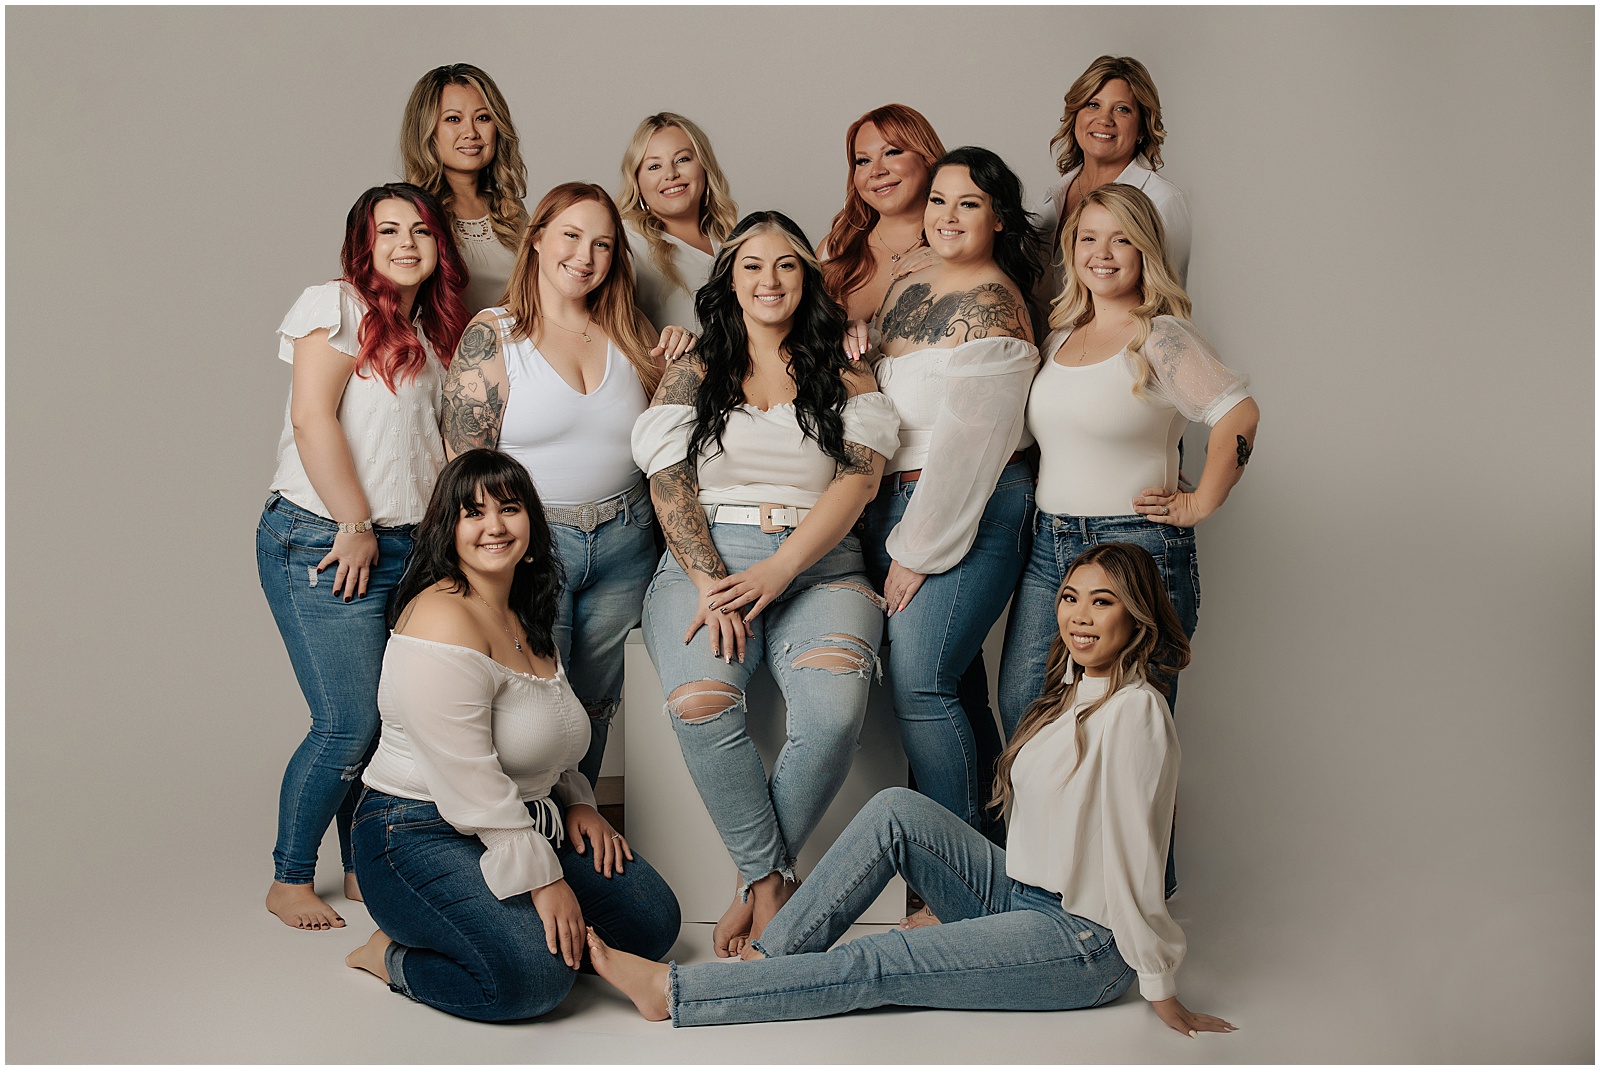 Image of a group of women all wearing a white shirt and blue jeans smiling at the camera | Team Headshots by Amanda Ellis Photography